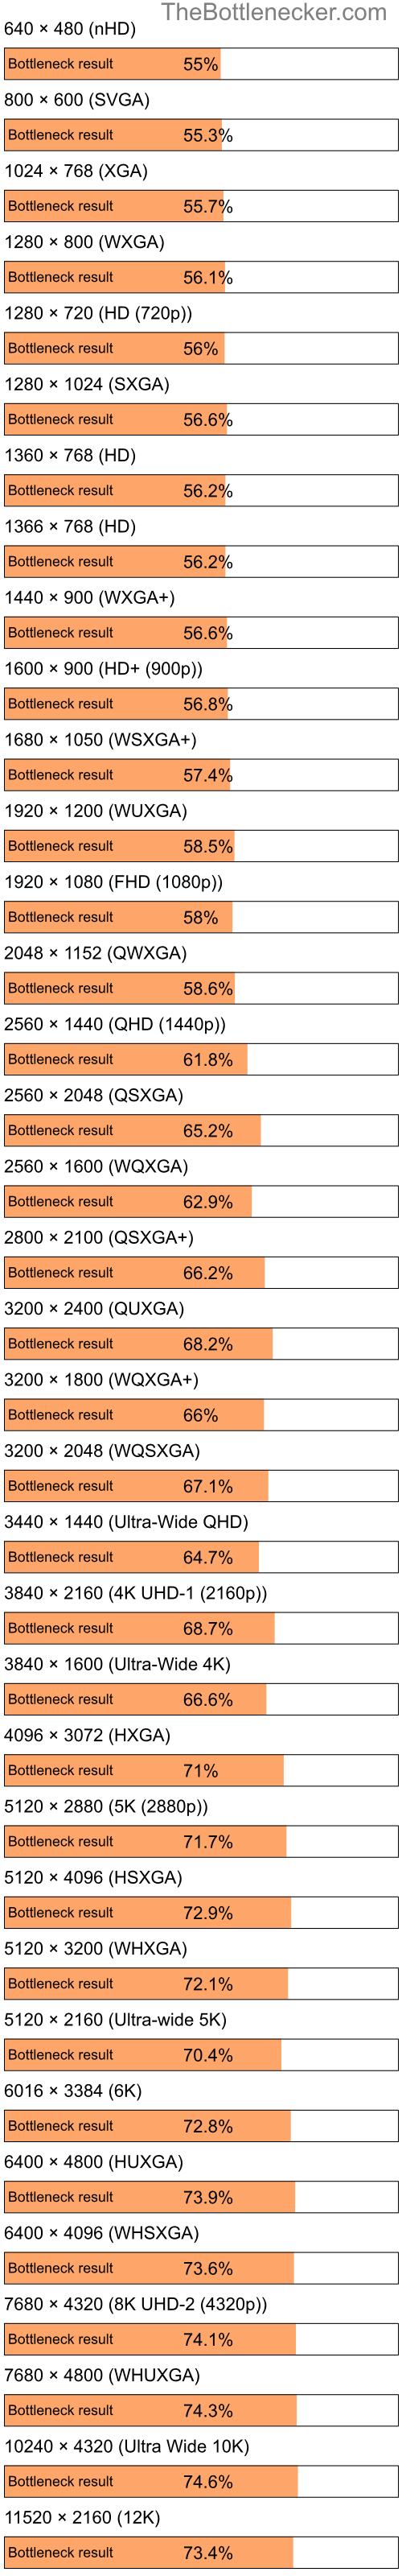 Bottleneck results by resolution for Intel Celeron and AMD M860G with Mobility Radeon 4100 in Processor Intense Tasks